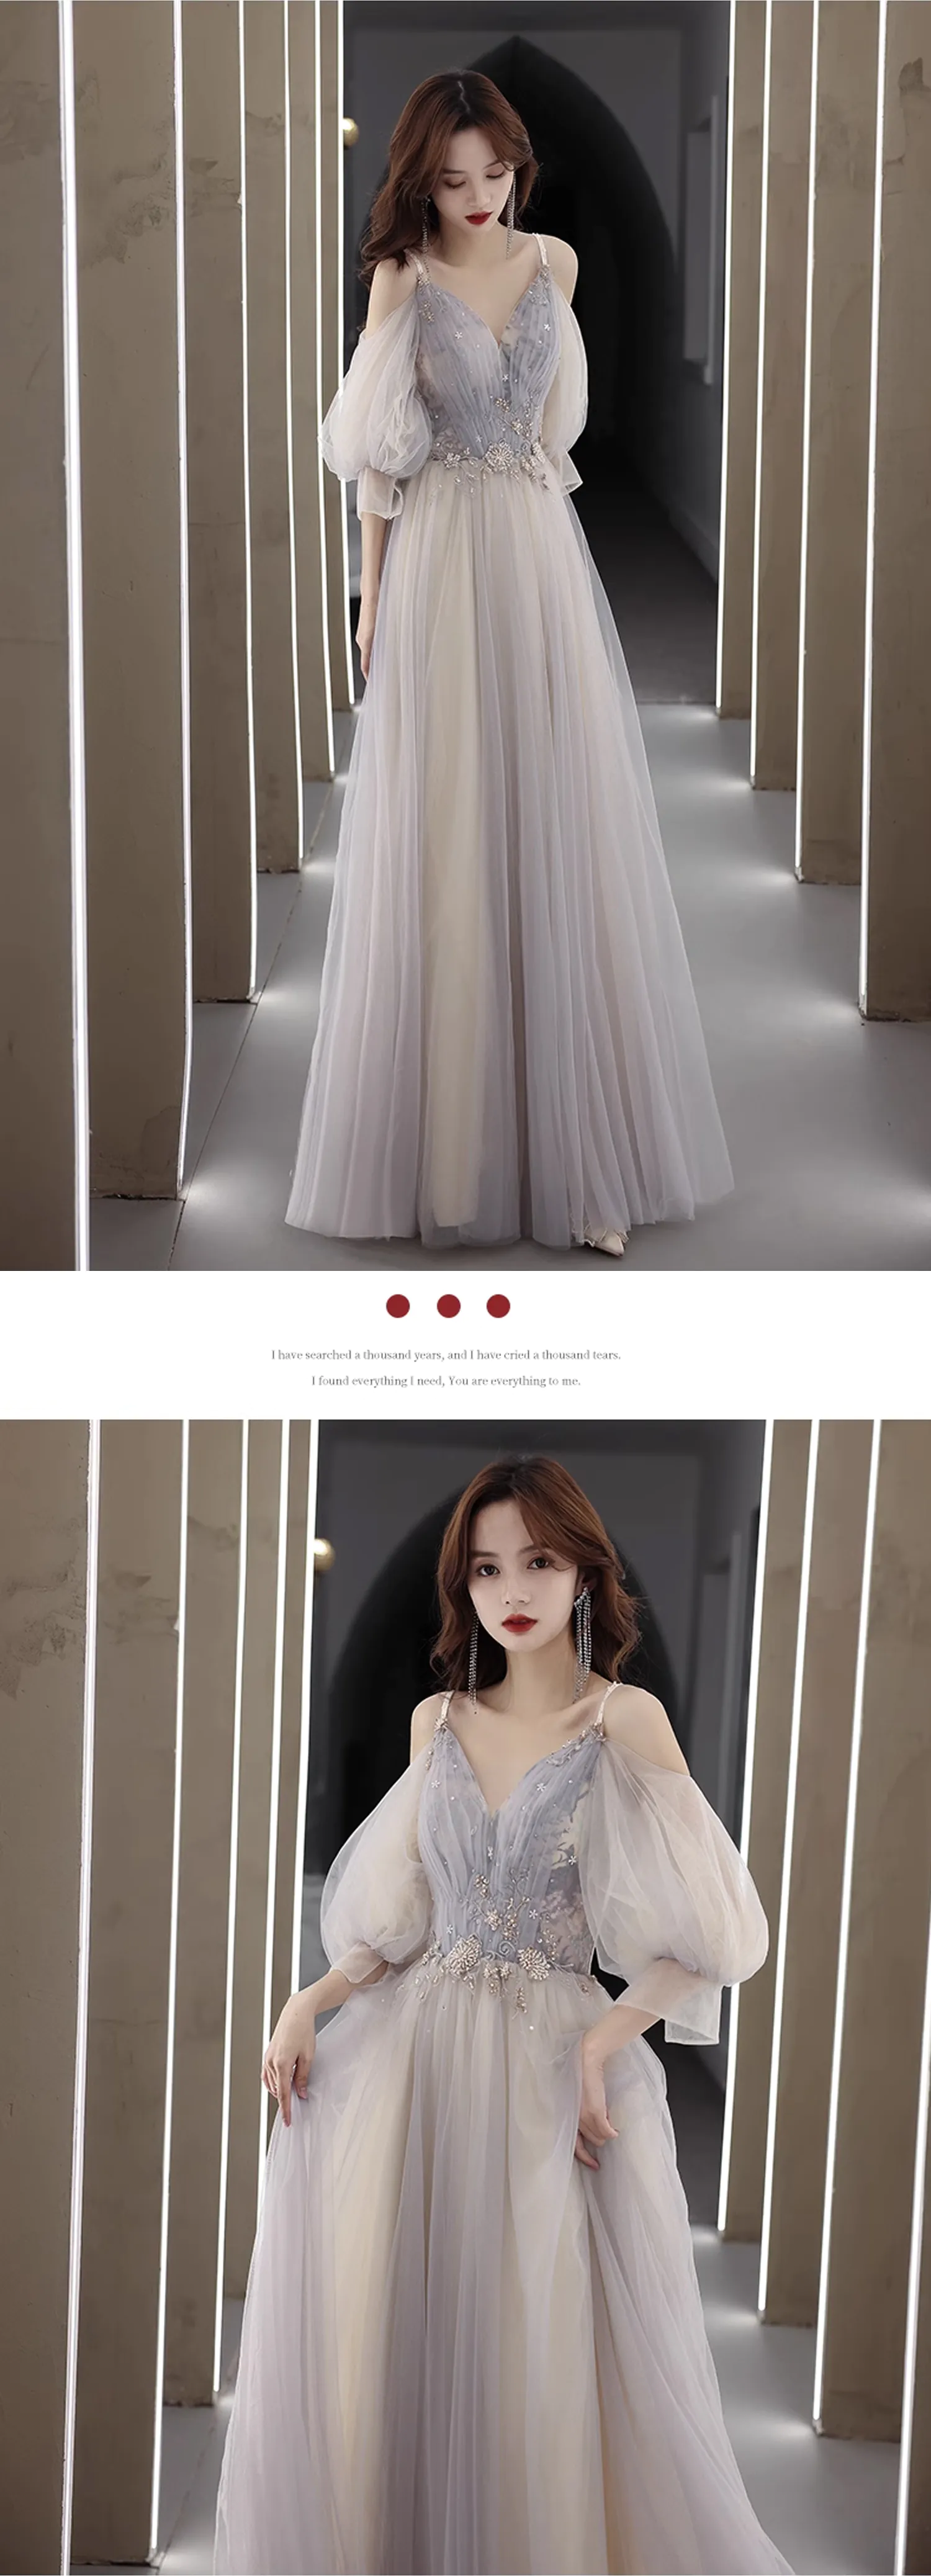 A-line-Gradient-Tulle-Embroidery-Long-Sleeve-Banquet-Prom-Dress10